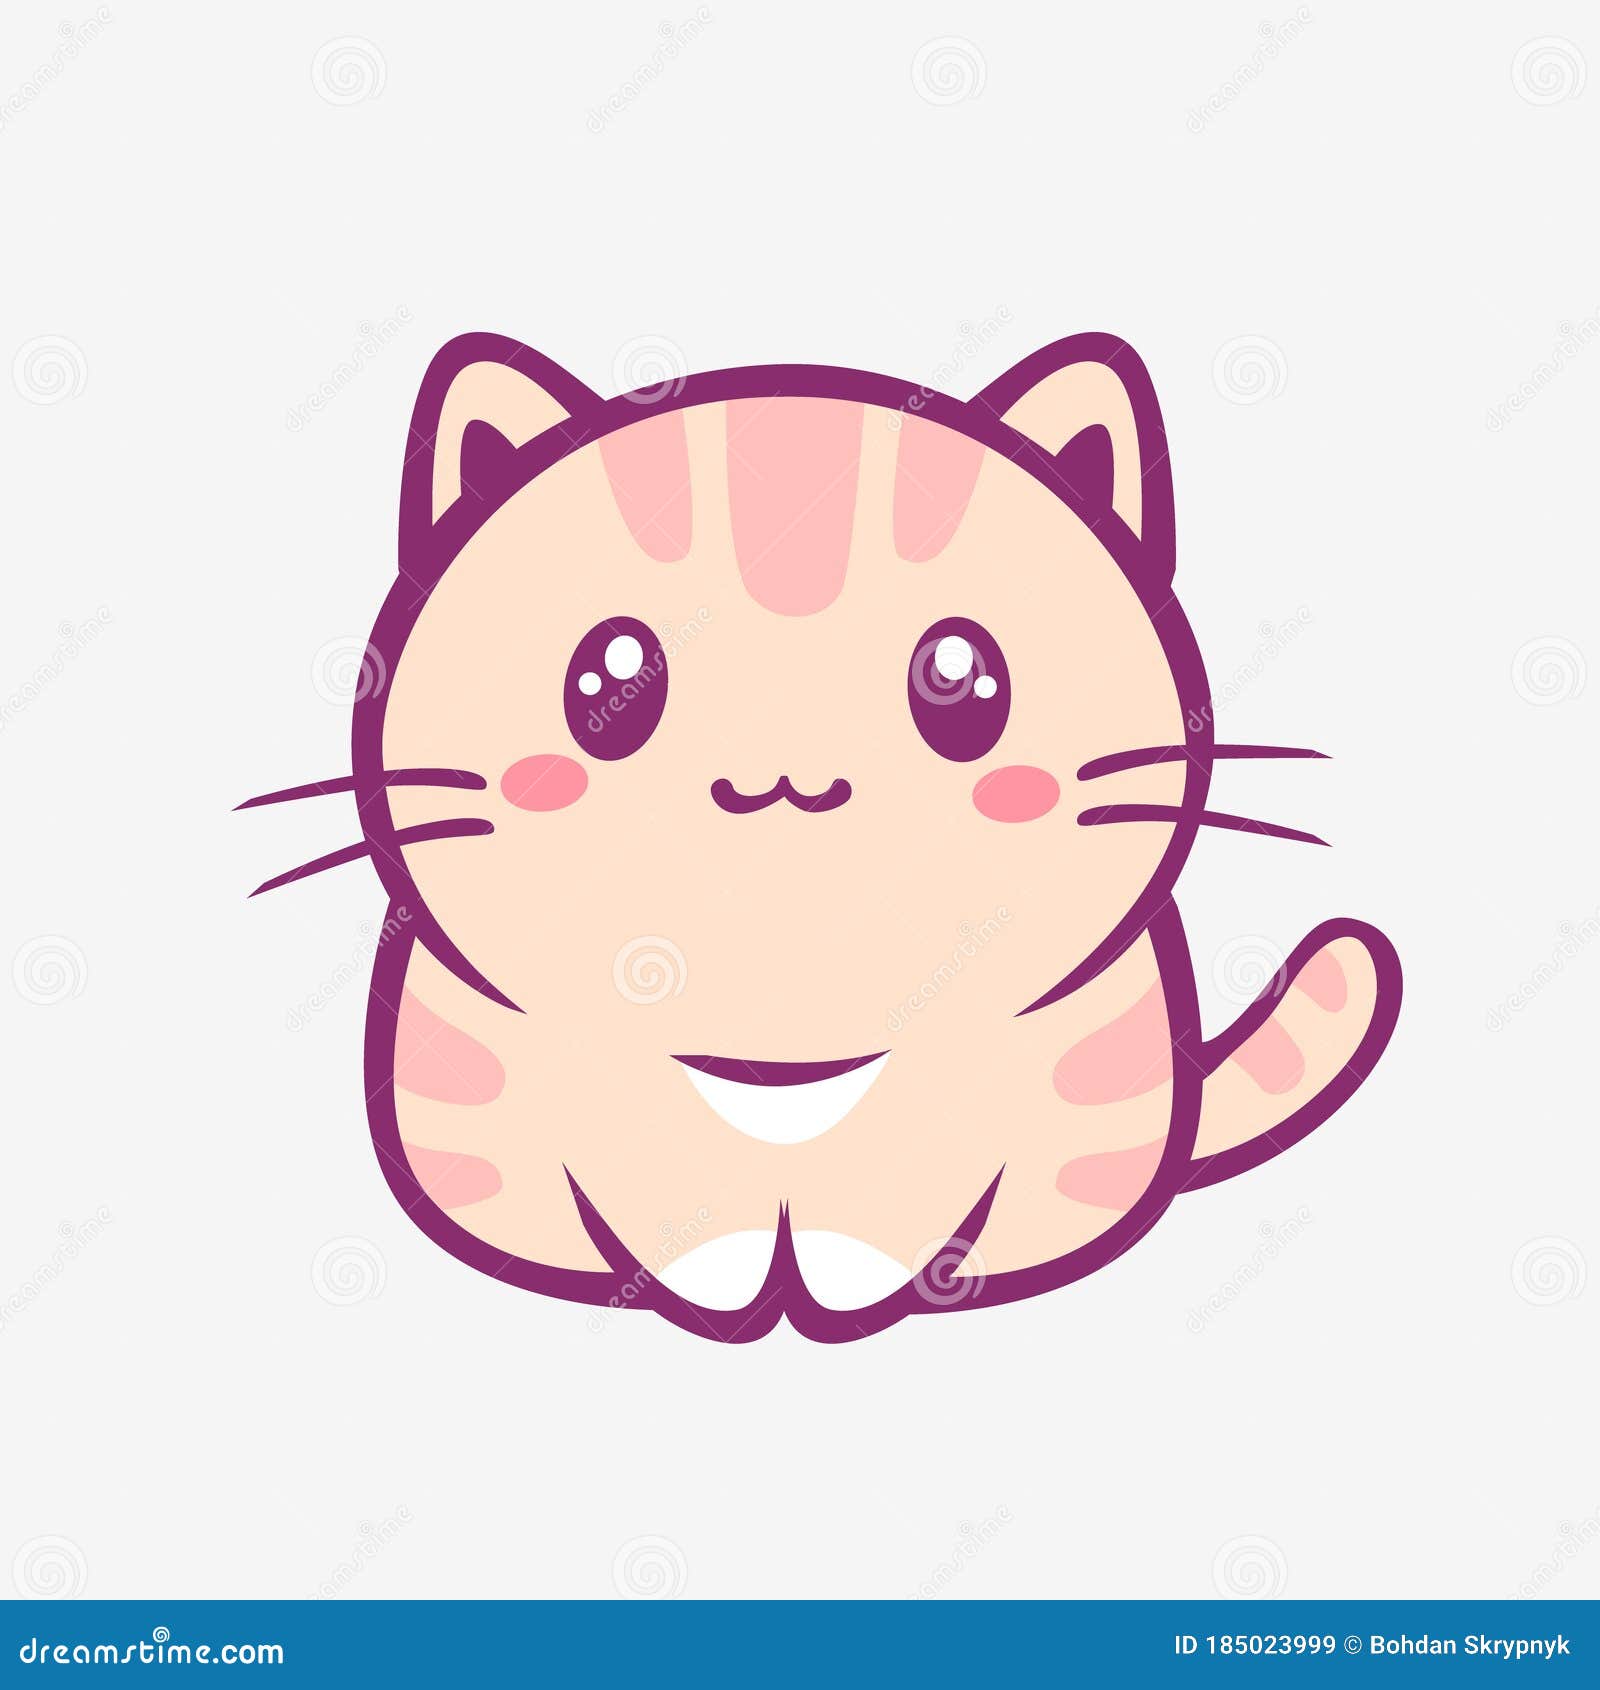 Kawaii Cartoon Cat. Funny Smiling Little Kitty with Pink Stripes Anime  Style Stock Vector - Illustration of fantasy, isolated: 185023999